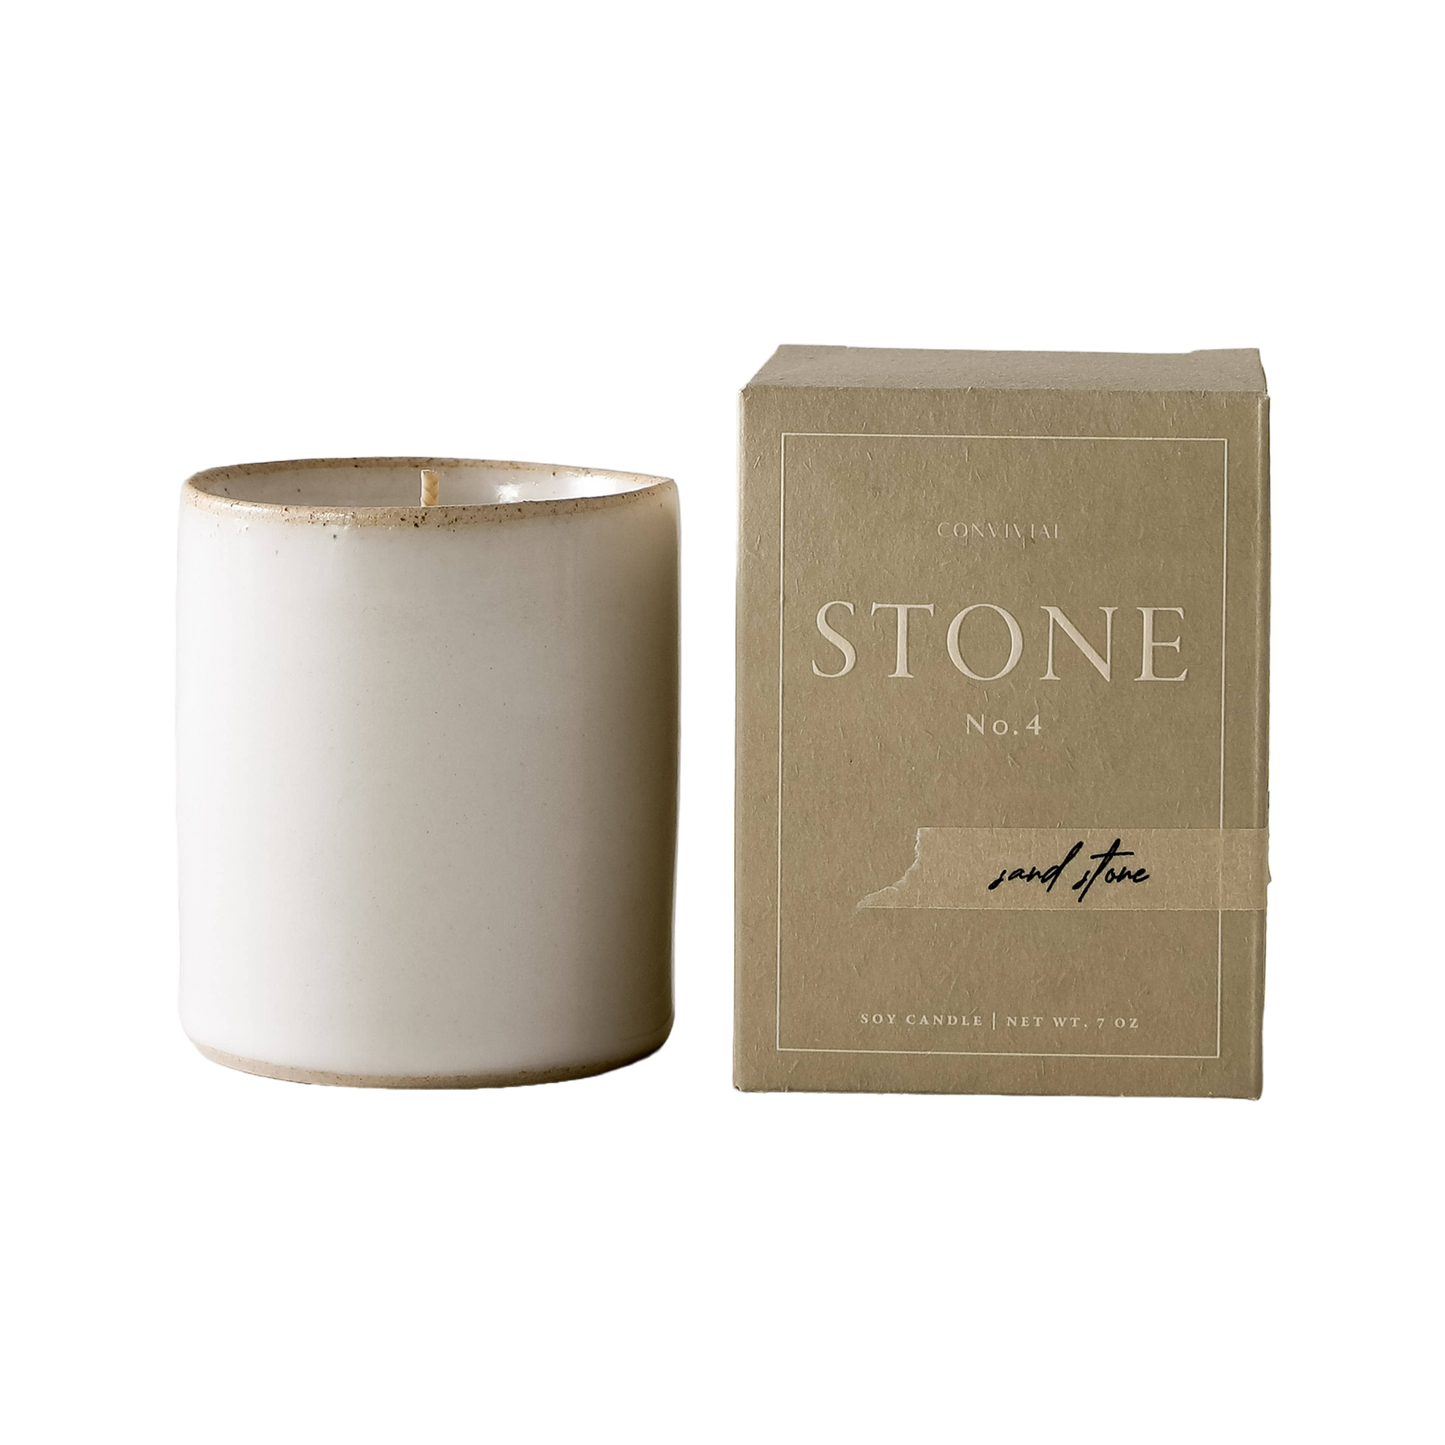 Sandstone Candle